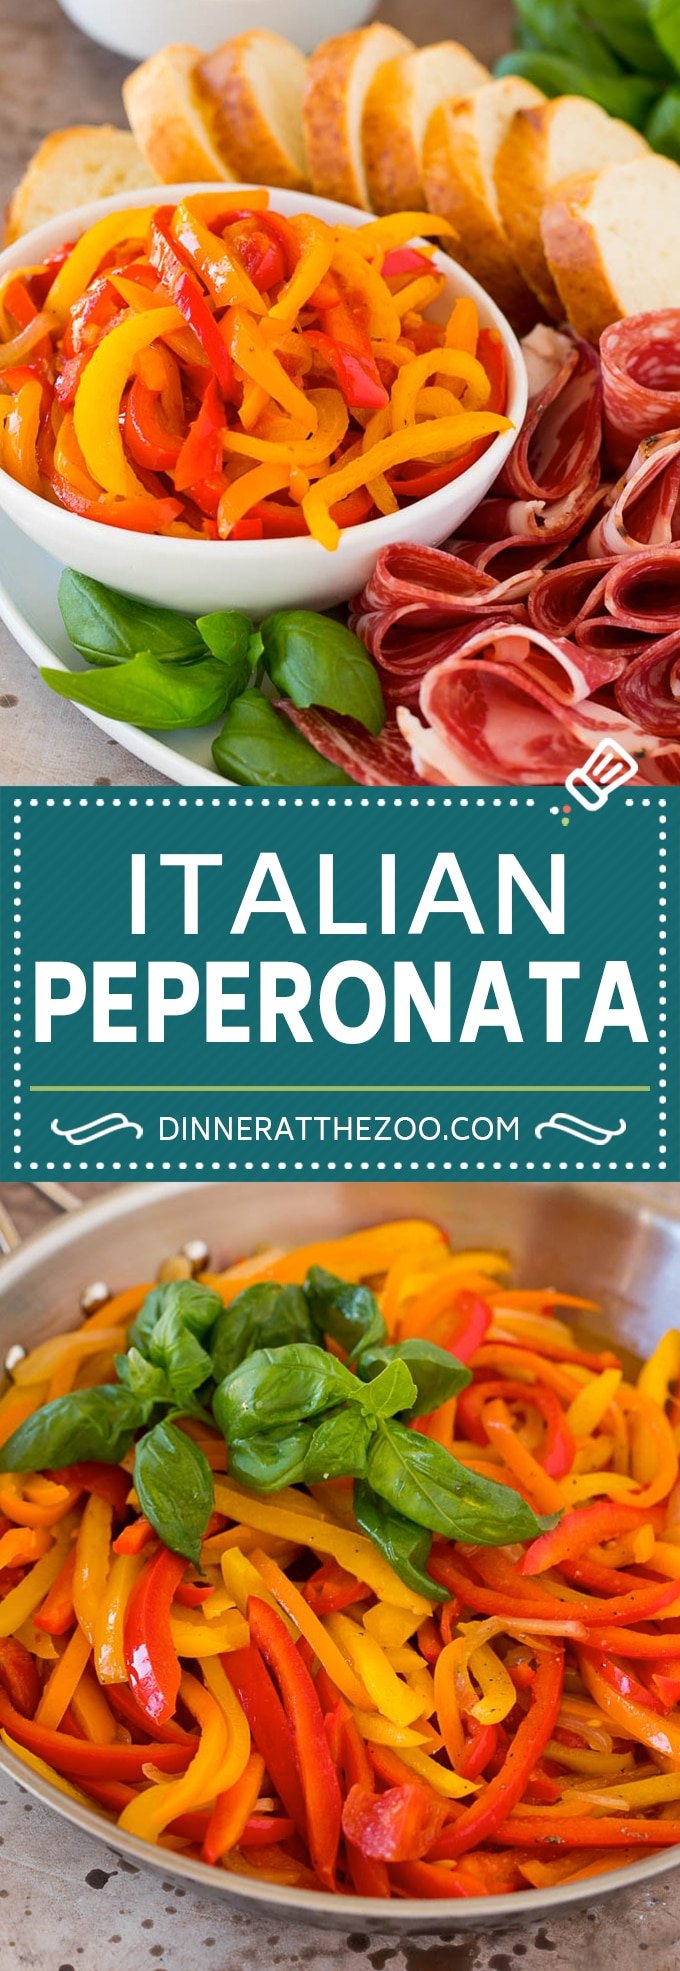 This peperonata is a classic Italian recipe of stewed bell peppers, onions and tomatoes.